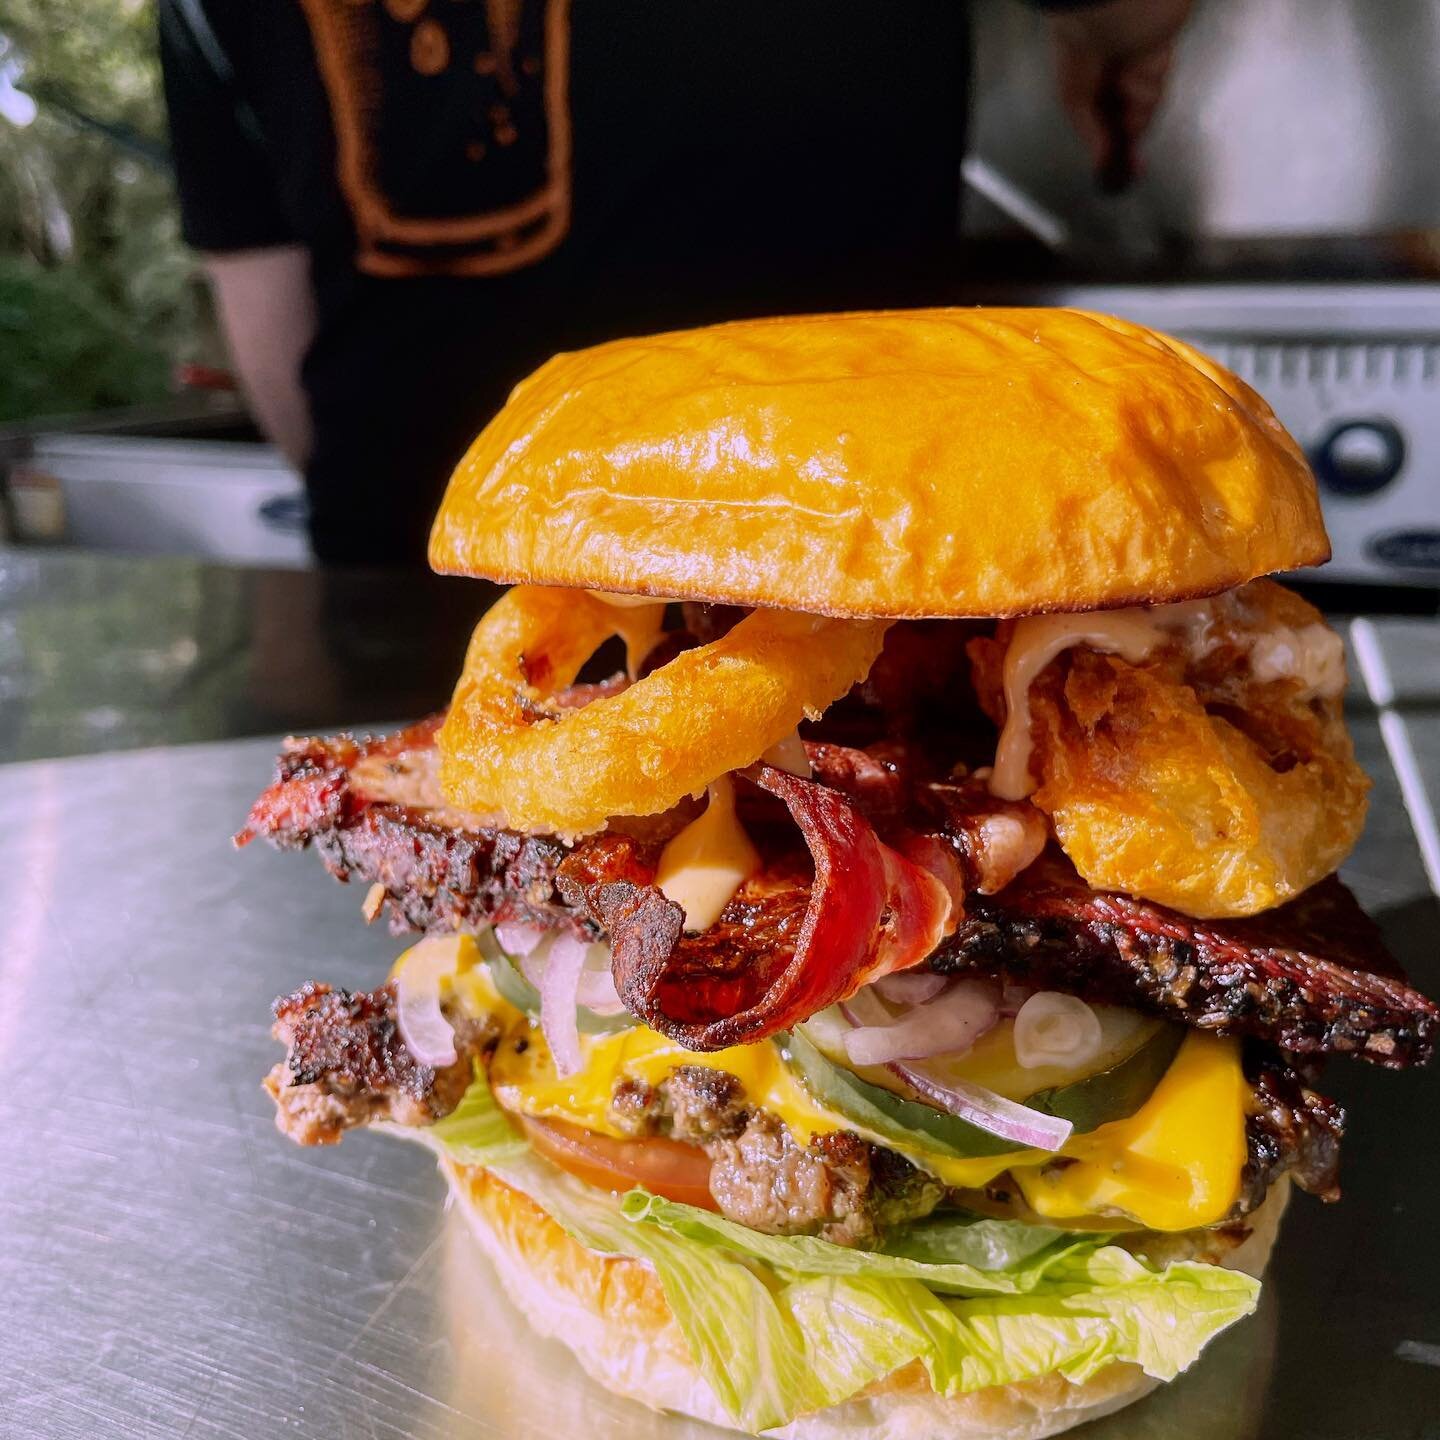 Speak easy burger this weekend is the kitchen sink burger! It&rsquo;s got a little bit of everything. Smoked brisket, onion rings, special sauce all on the back of an O.G. base. It&rsquo;ll make you want to slap ya mama.